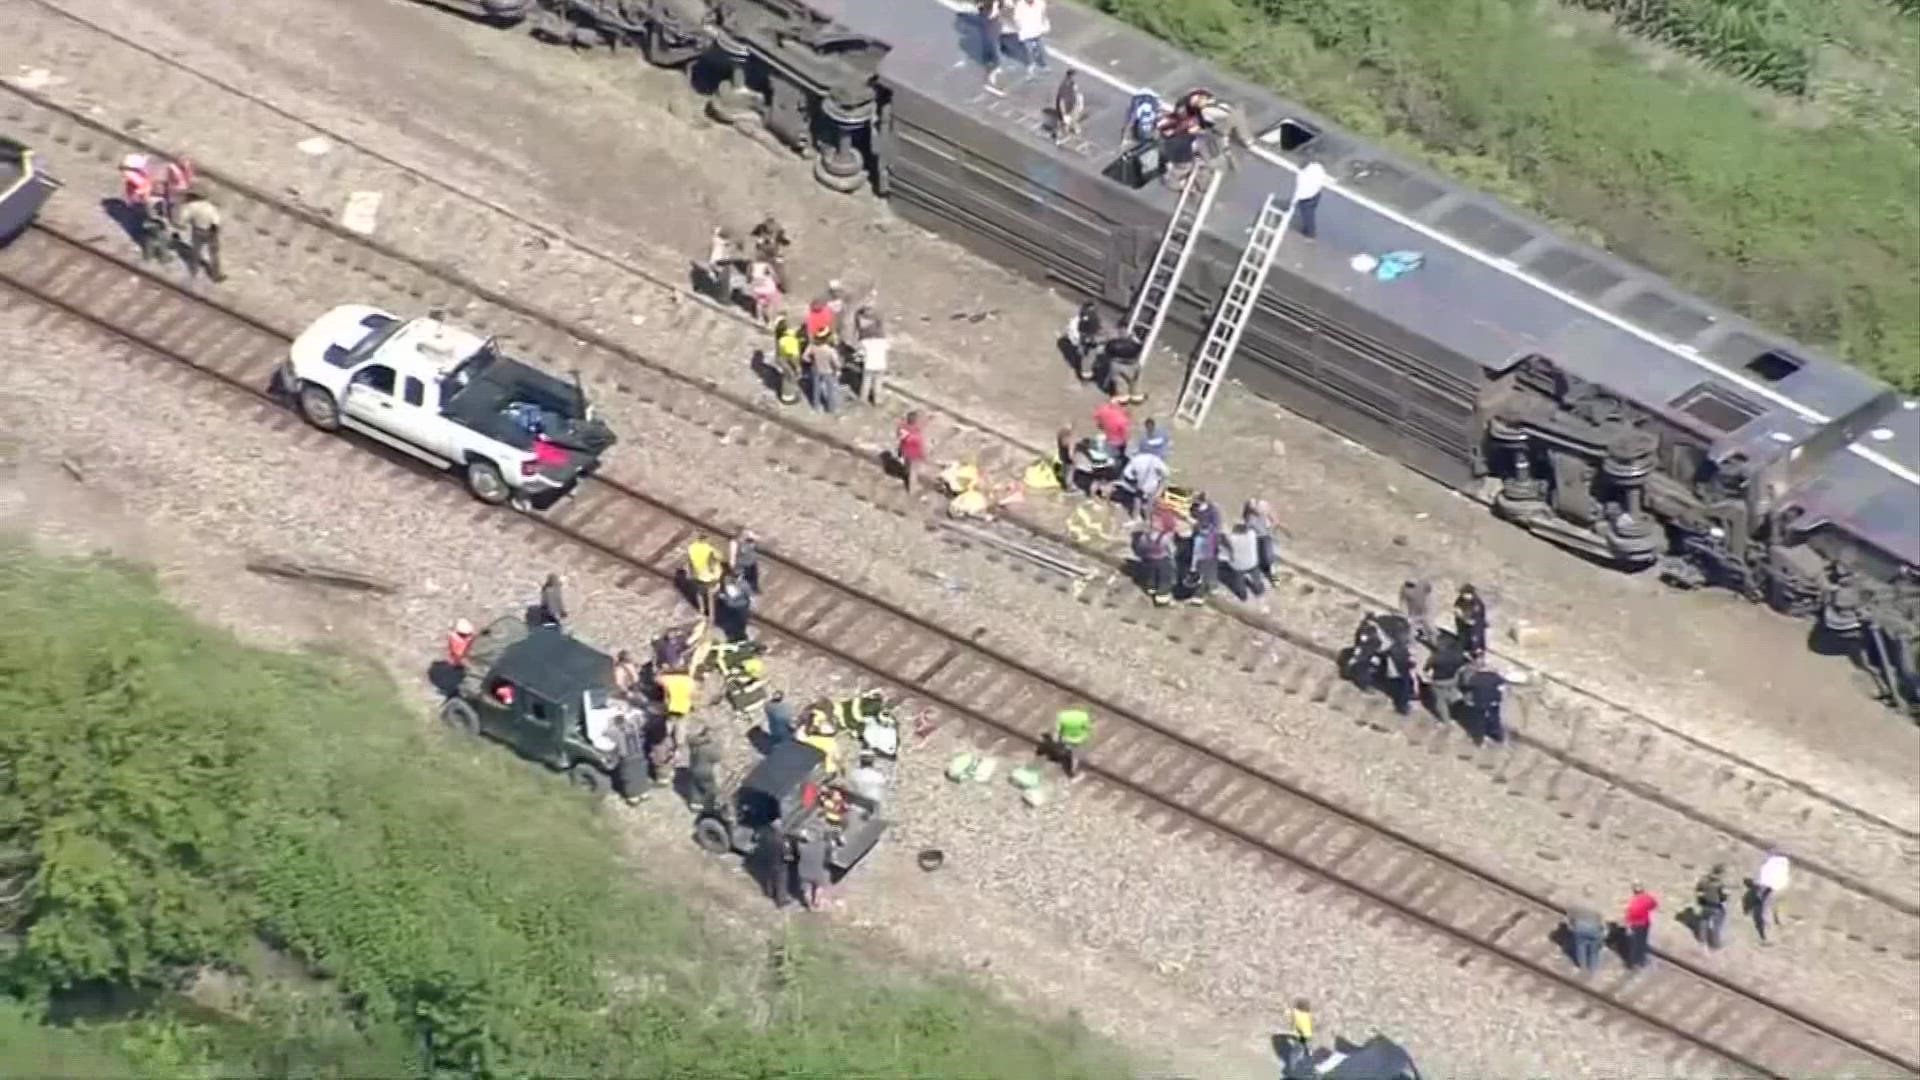 An Amtrak passenger train traveling from Los Angeles to Chicago struck a dump truck Monday in a remote area of Missouri, killing three people and injuring dozens.